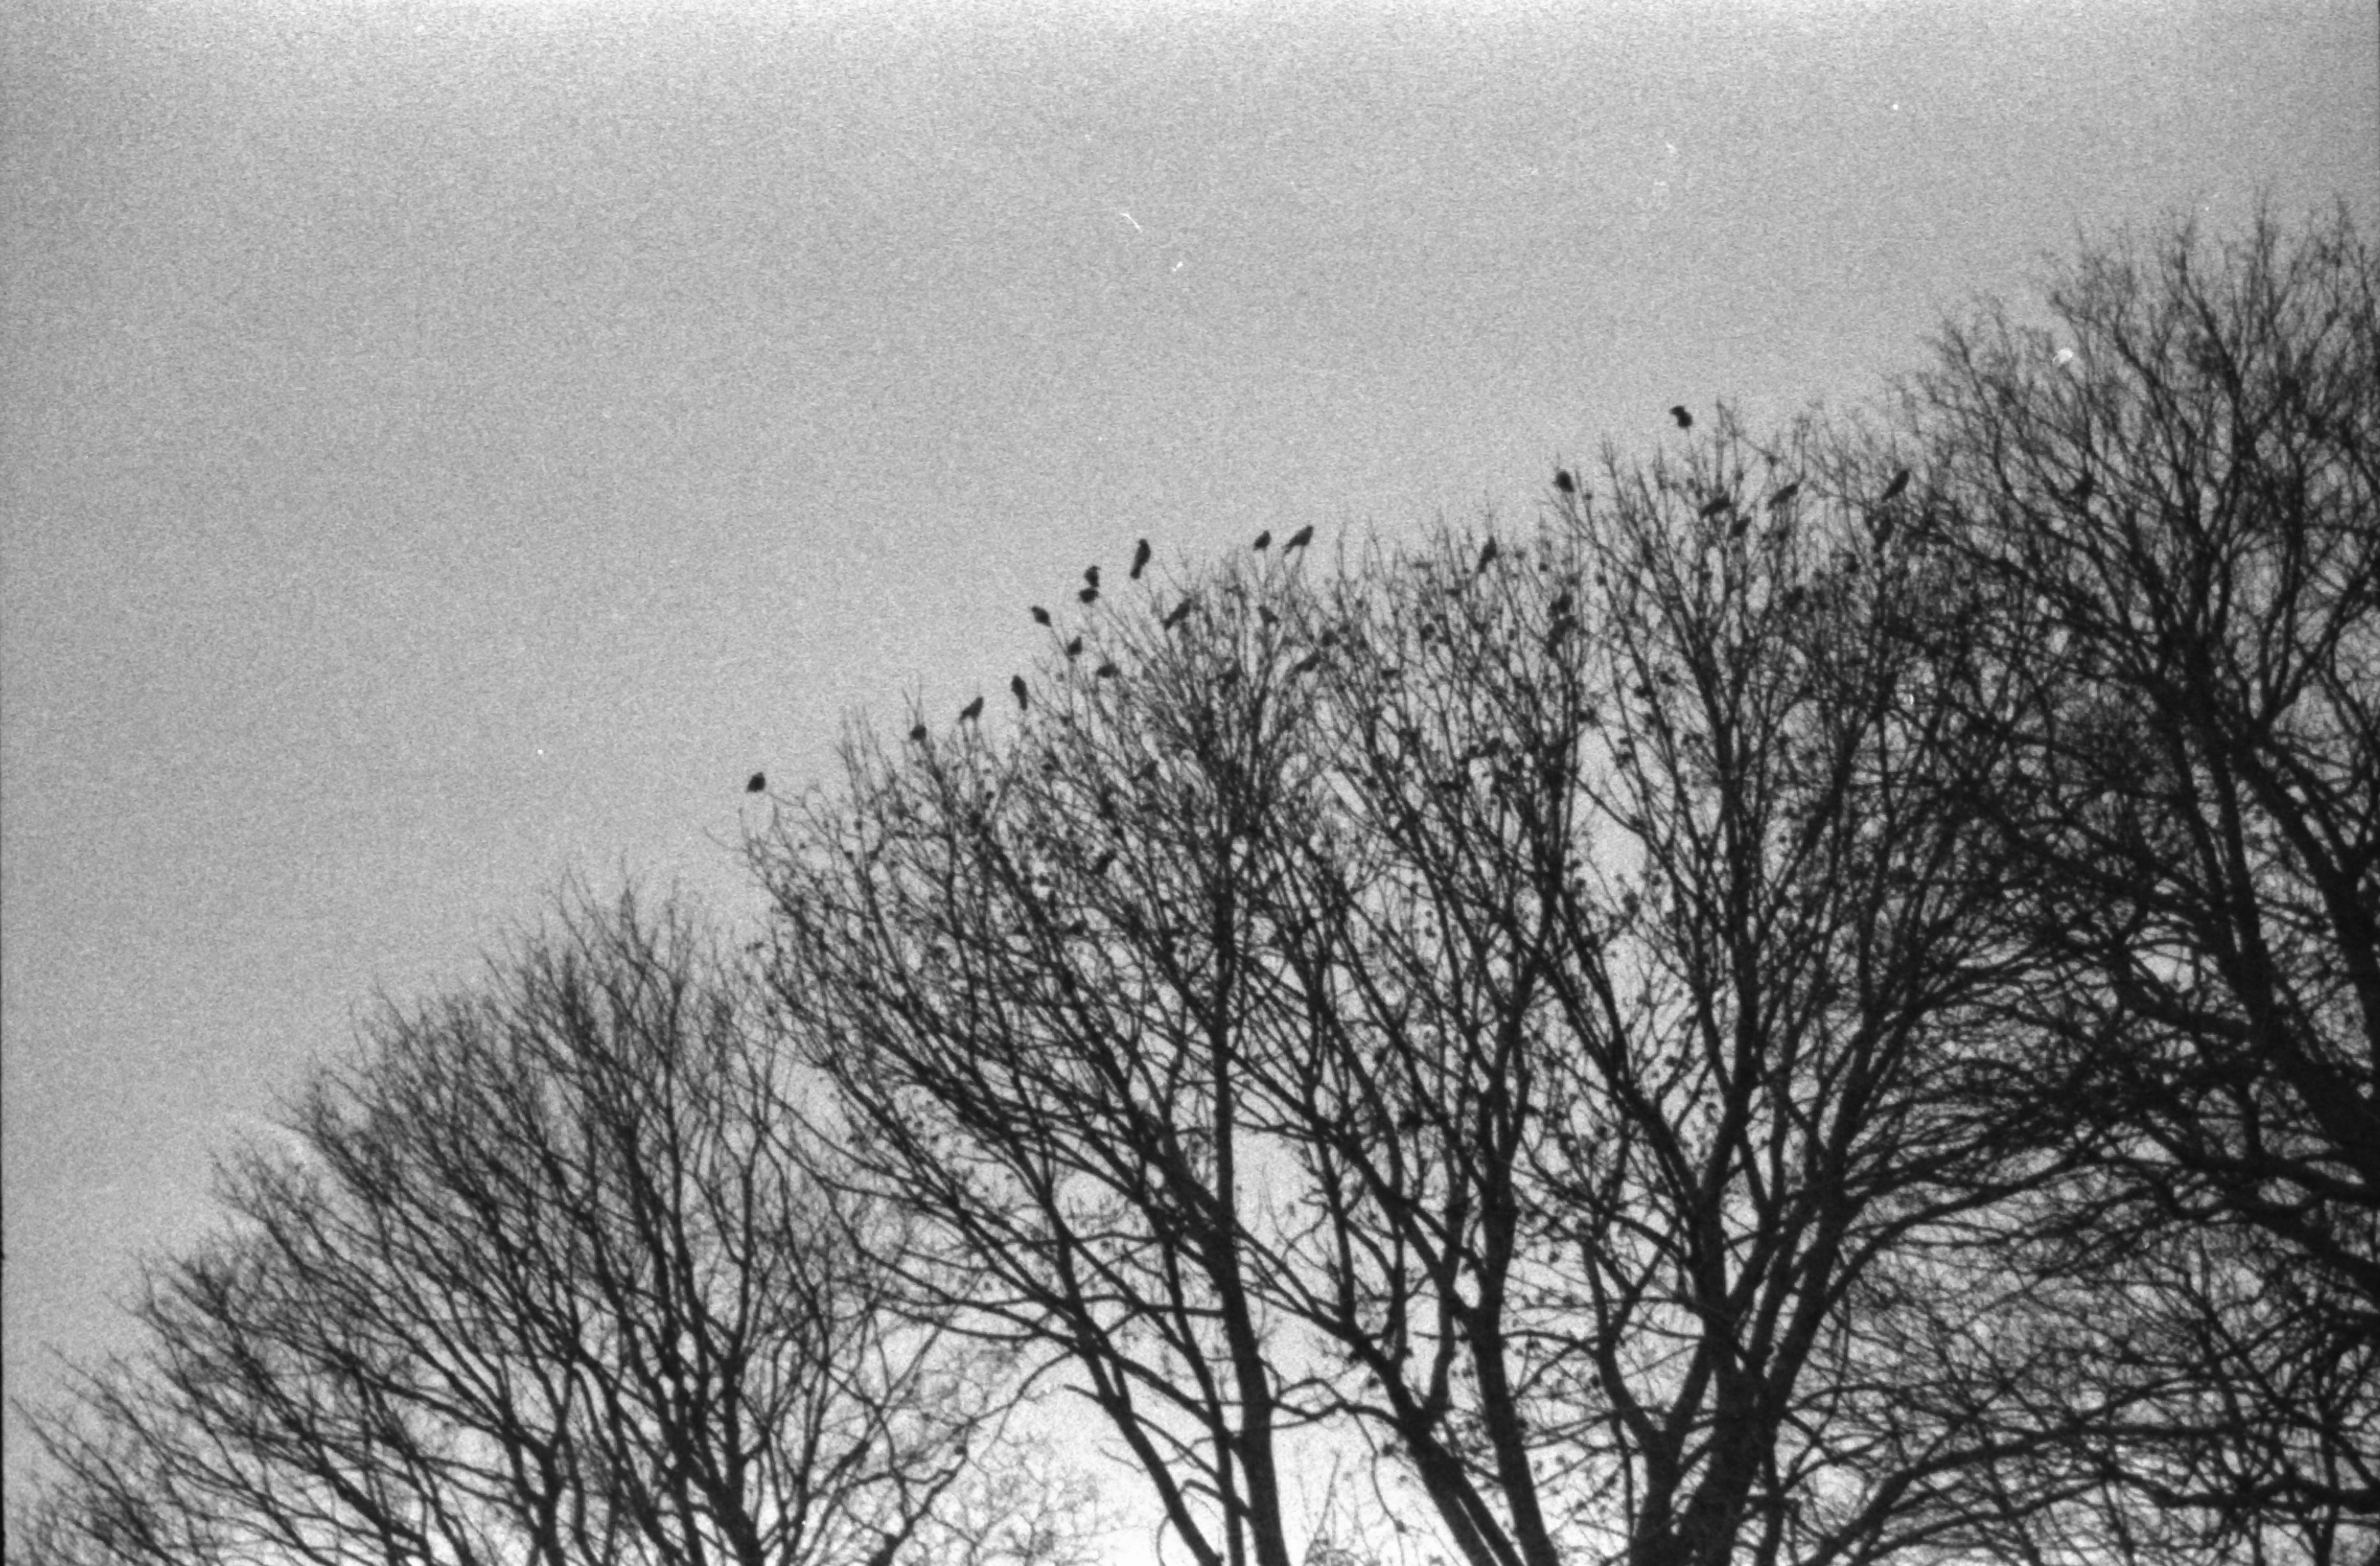 Black and white picture of birds on a barren tree seen from the distance zoomed in